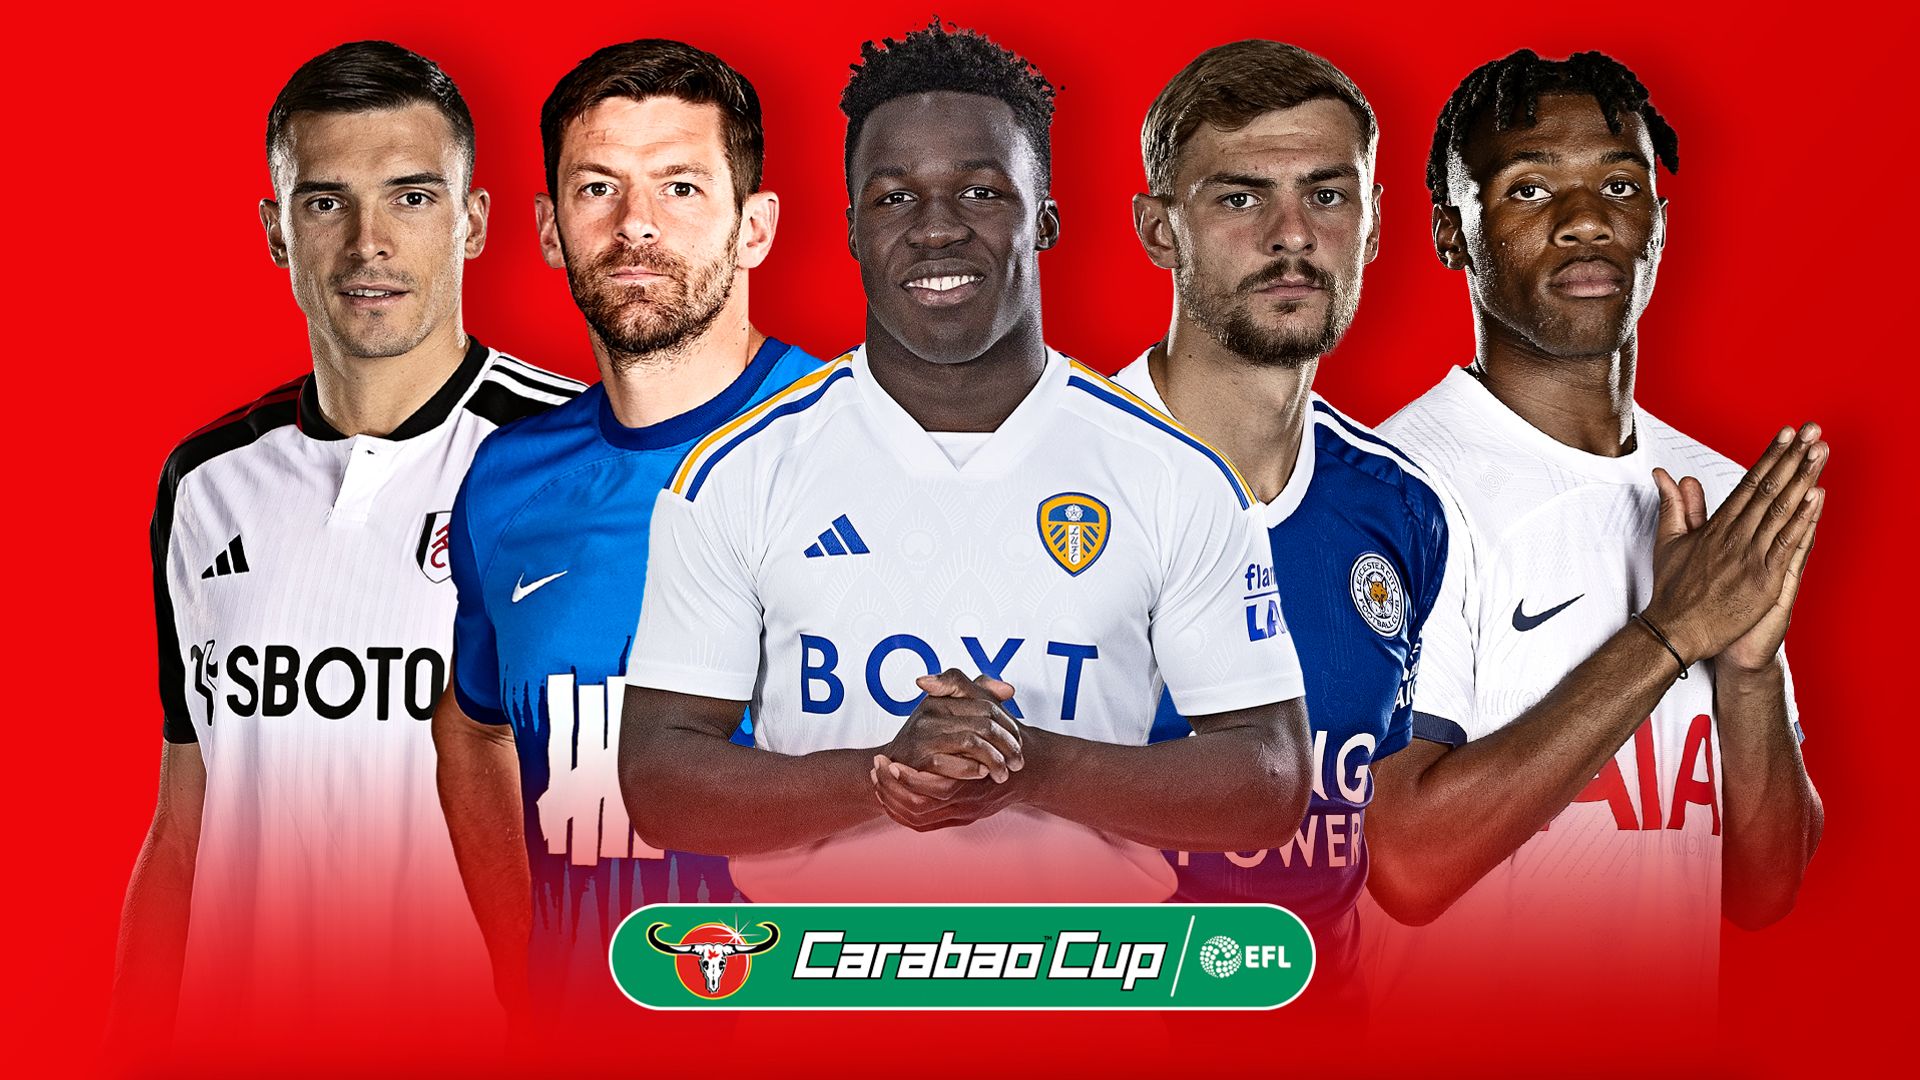 Carabao Cup second round preview: Salford vs Leeds live on Sky plus 18 ties